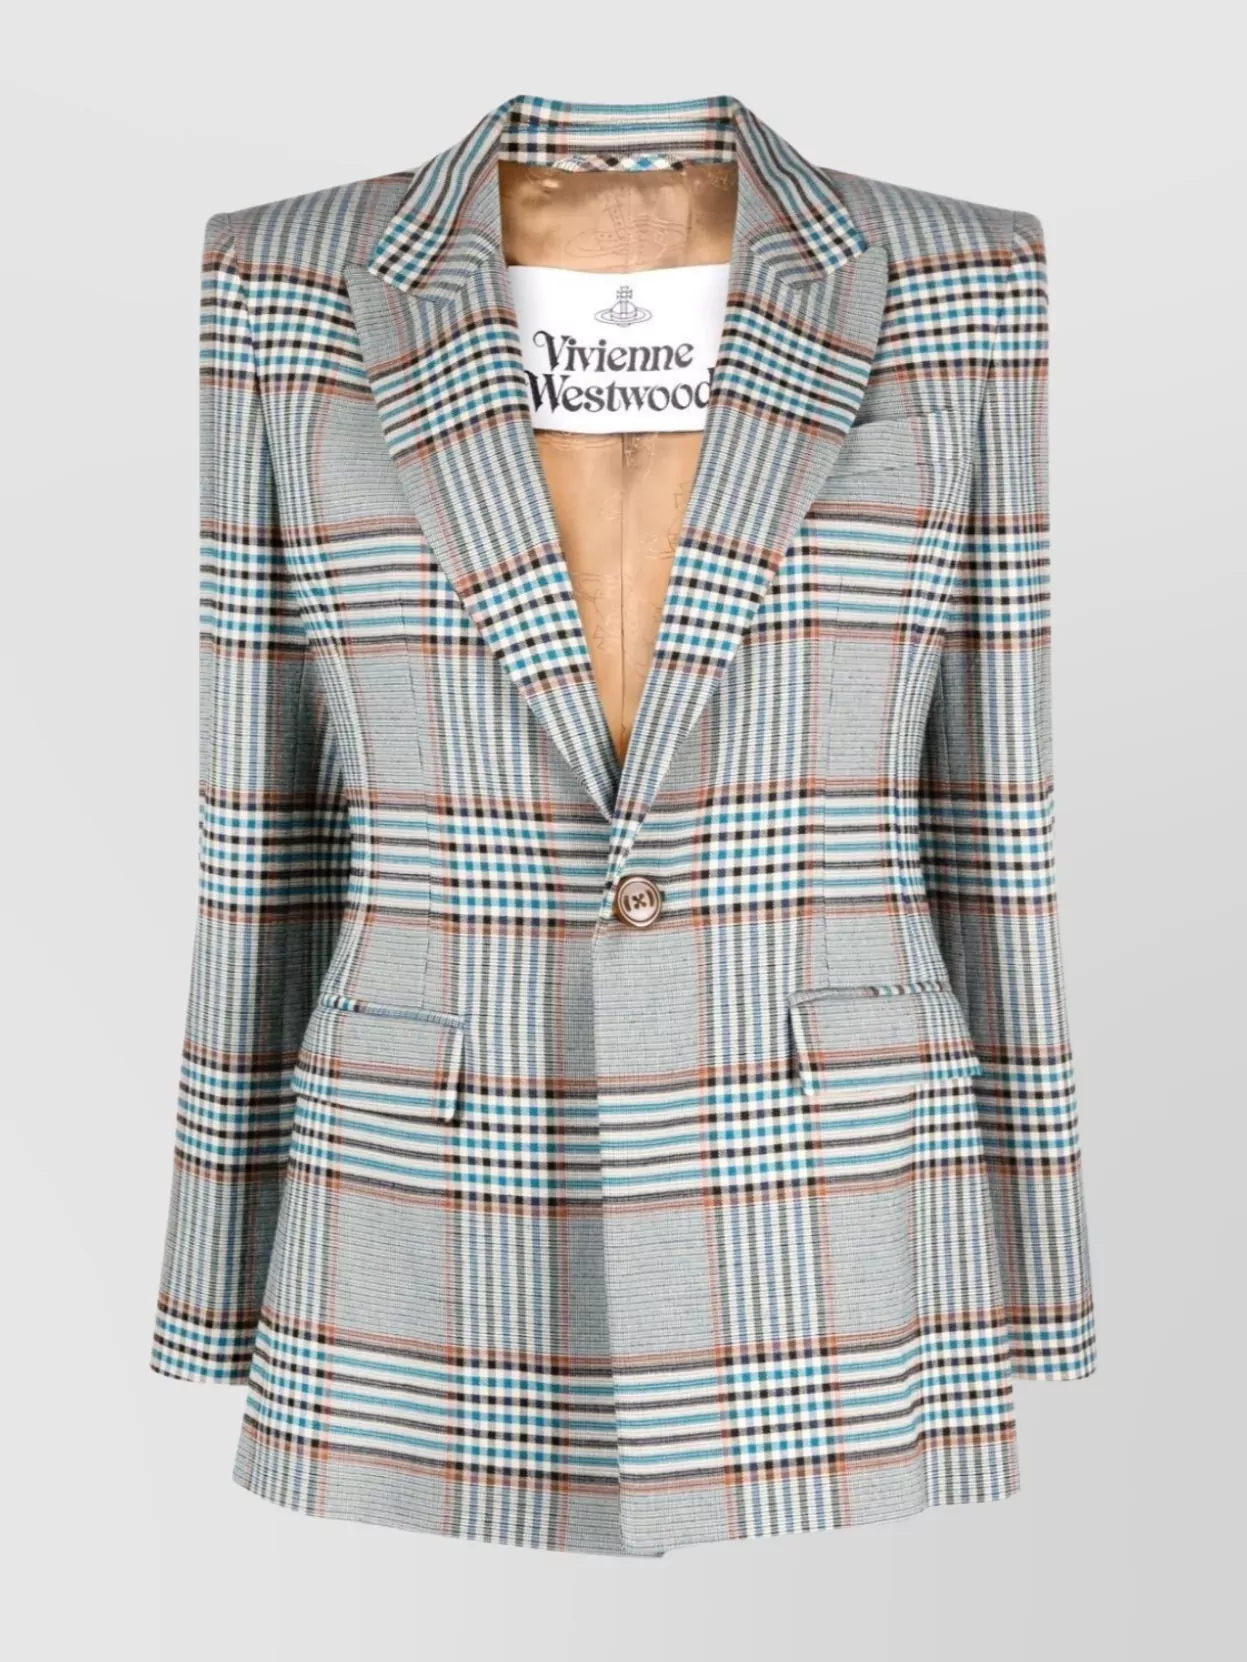 VIVIENNE WESTWOOD CHECK PRINT WOOL BLEND BLAZER WITH ENGLISH REAR VENTS